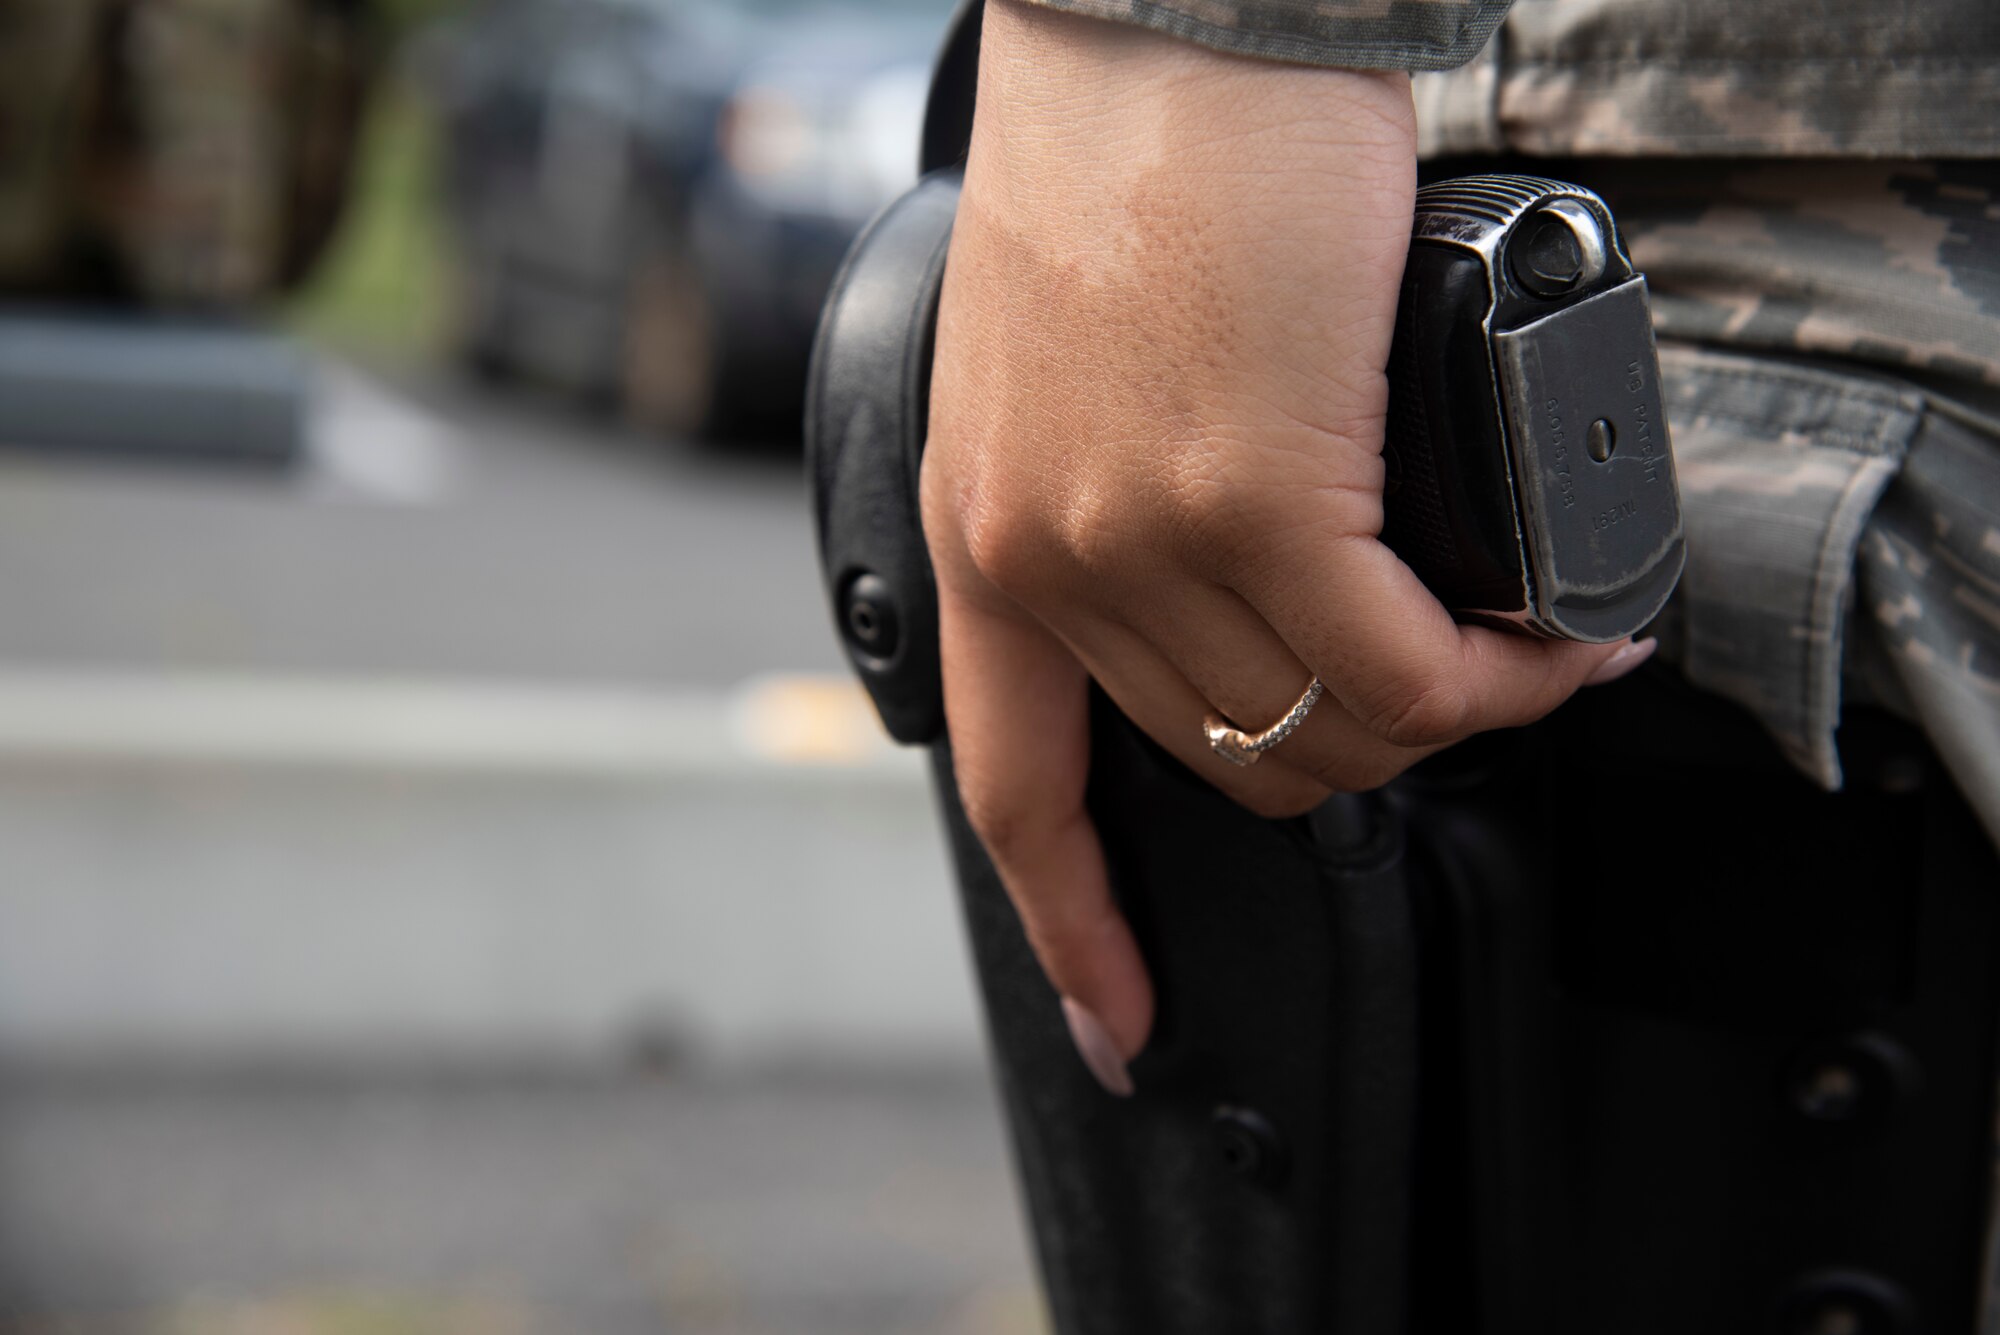 U.S. Air Force Airman 1st Class Aliciana Infante-Crawford, a 35th Security Forces Squadron armory journeyman, holsters a weapon during an armory display at Misawa Air Base, Japan, May 15, 2019. As a security forces member, she is responsible for protecting the U.S. Air Force’s most valuable assets–the lives of their fellow Airmen and aircraft. National Police Week pays special recognition to those who lost their lives in the line of duty for the safety and protection of others. (U.S. Air Force photo by Airman China Shock)